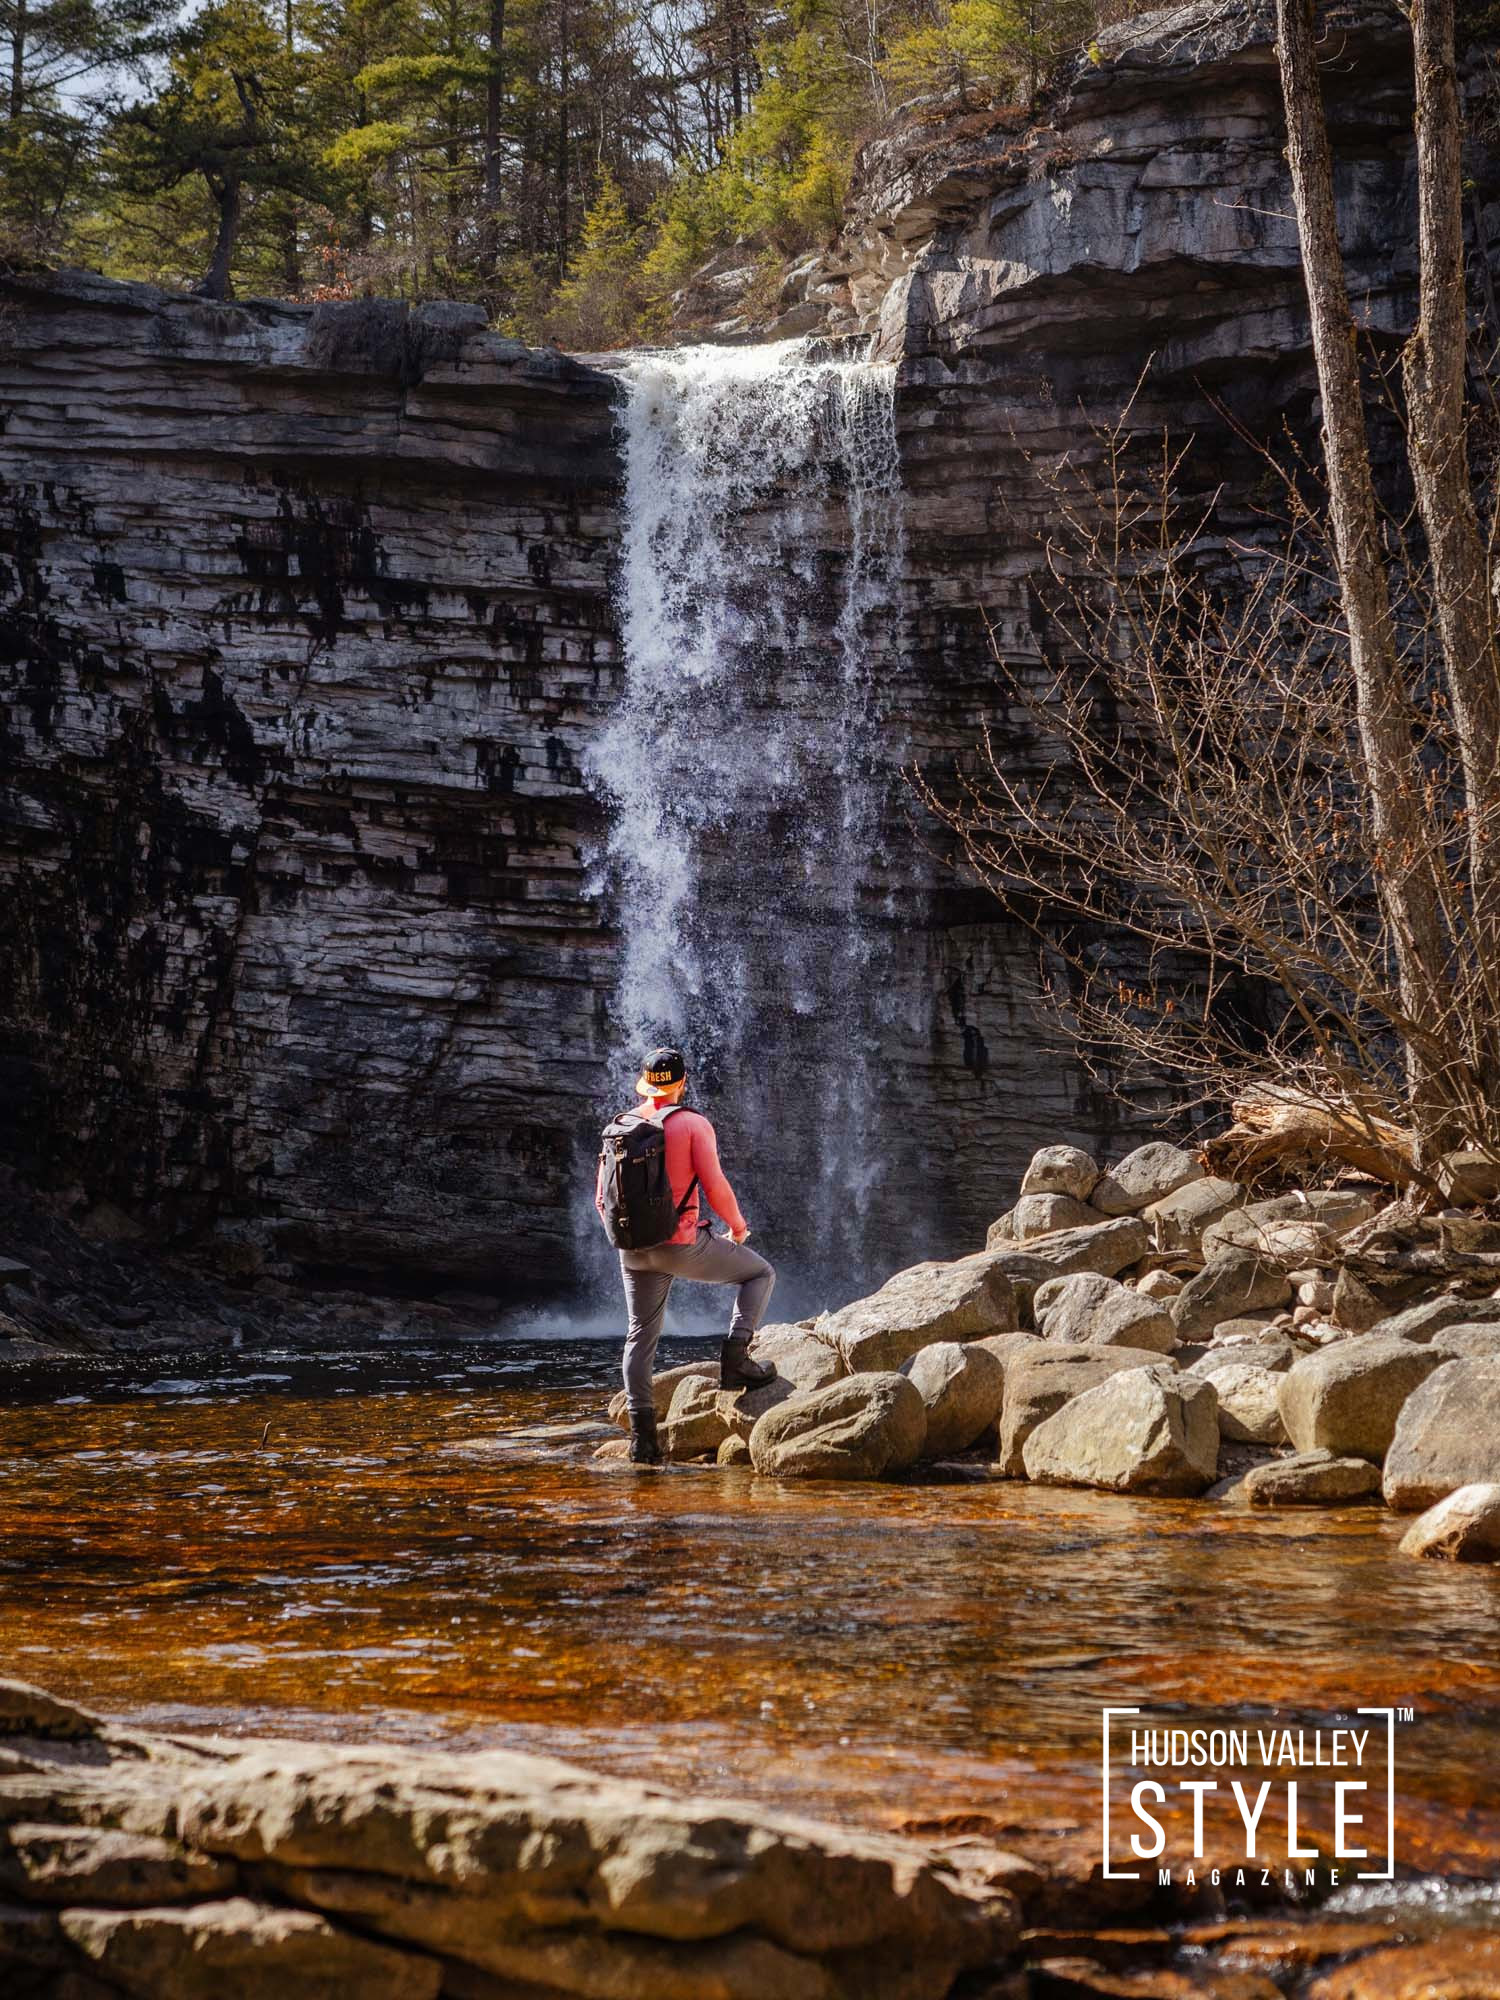 Weekend Warriors: Epic Day Hikes in the Shawangunk Ridge – Hiking Adventures with Bodybuilding Coach Maxwell Alexander – New Platz, NY – Presented by Alluvion Vacations – The Best Wellness Travel Getaways in the Hudson Valley and Catskills